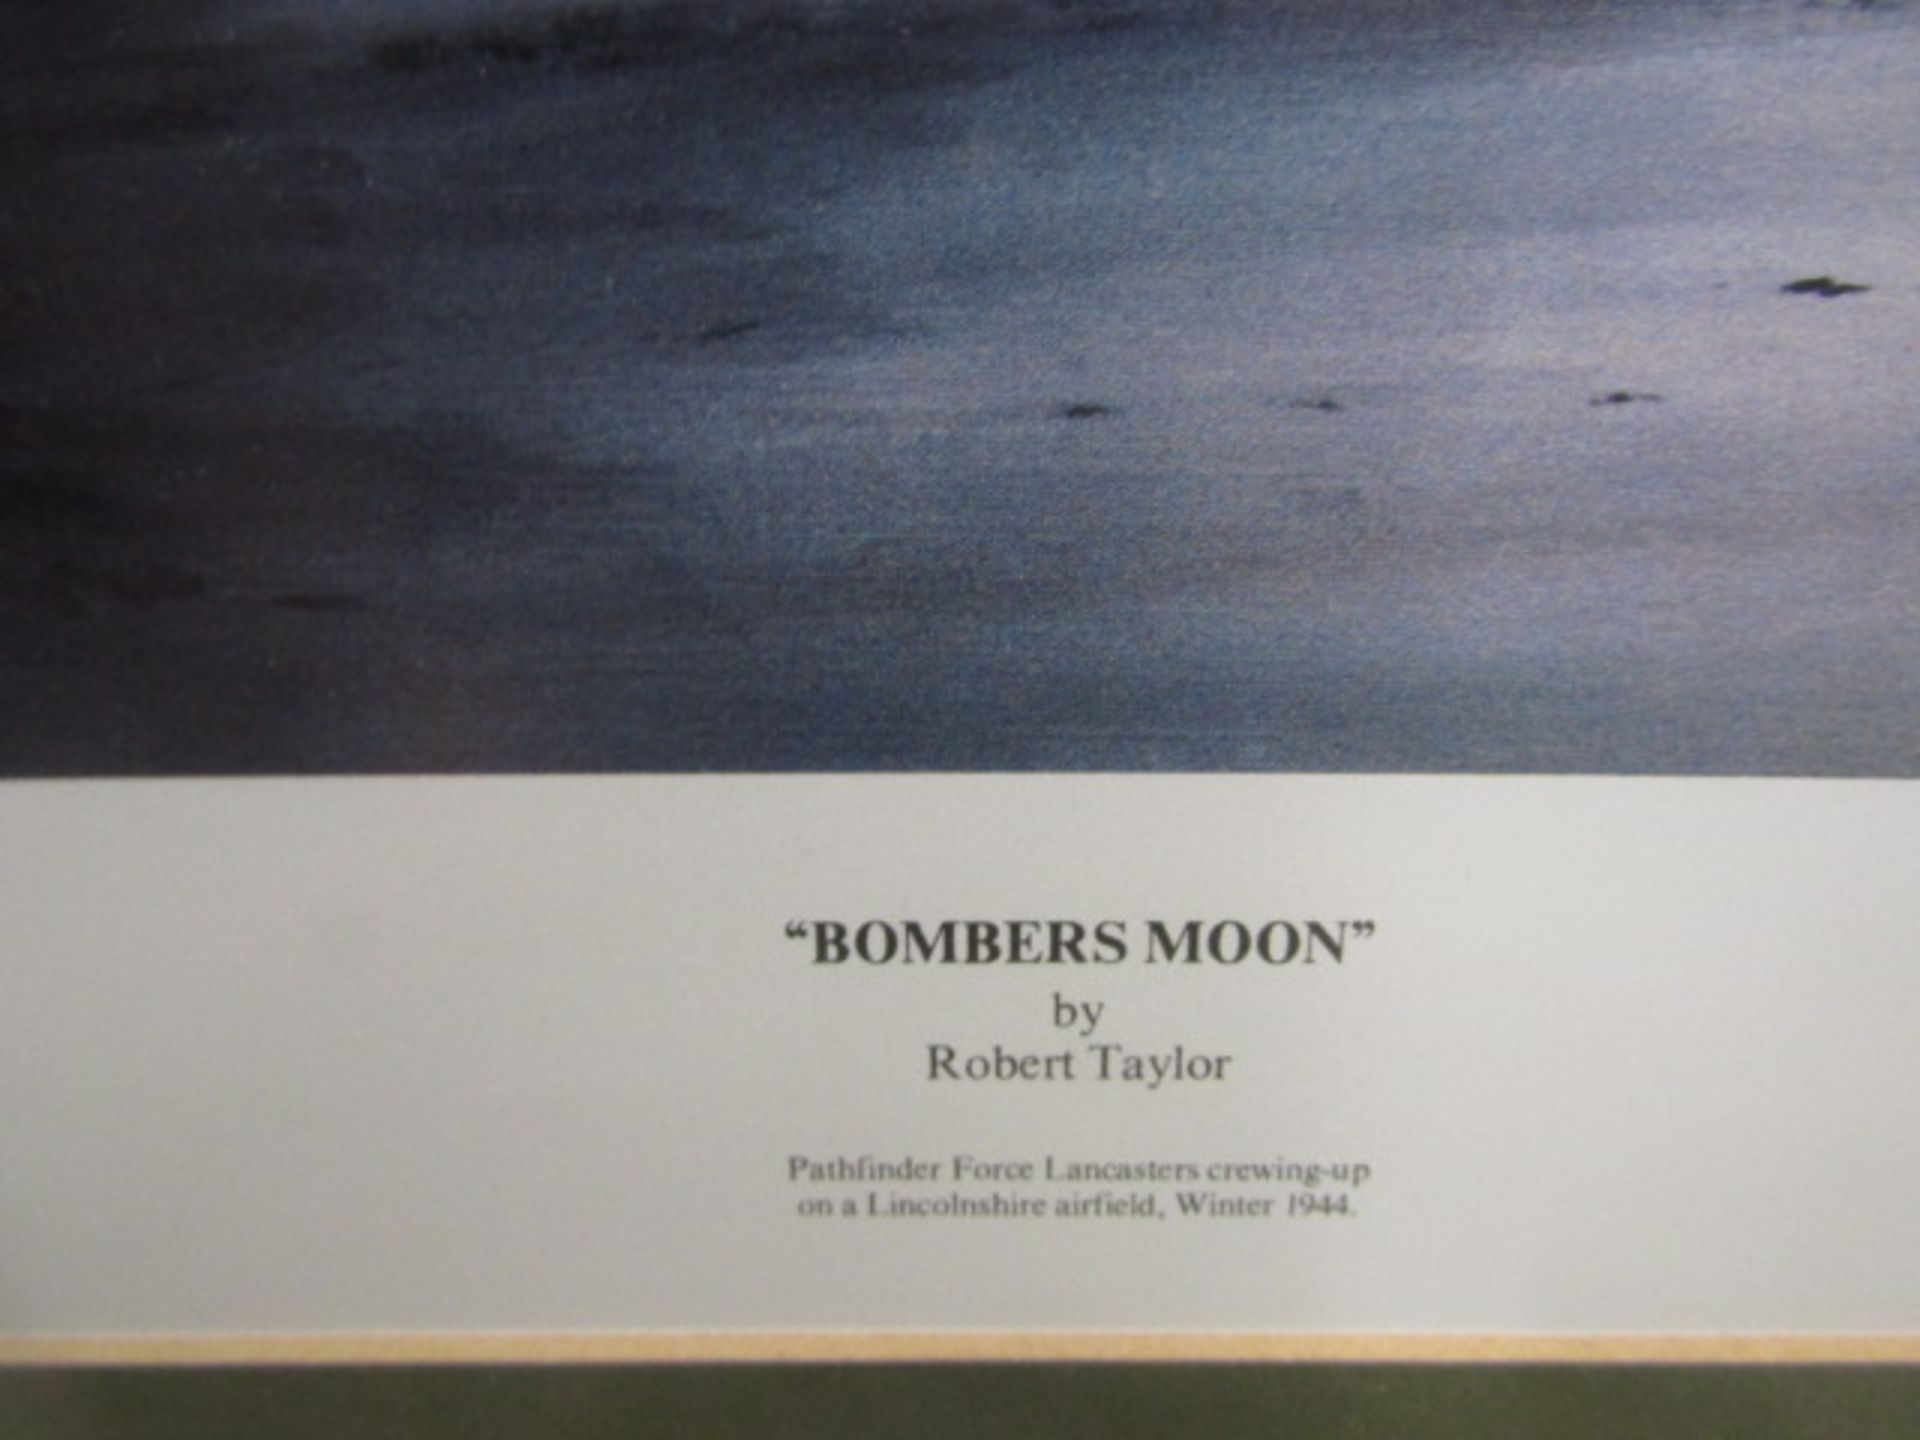 Robert Taylor 'Bomber's Moon' ltd edition print 726/850 pencil signed in margin72x52cm - Image 2 of 9